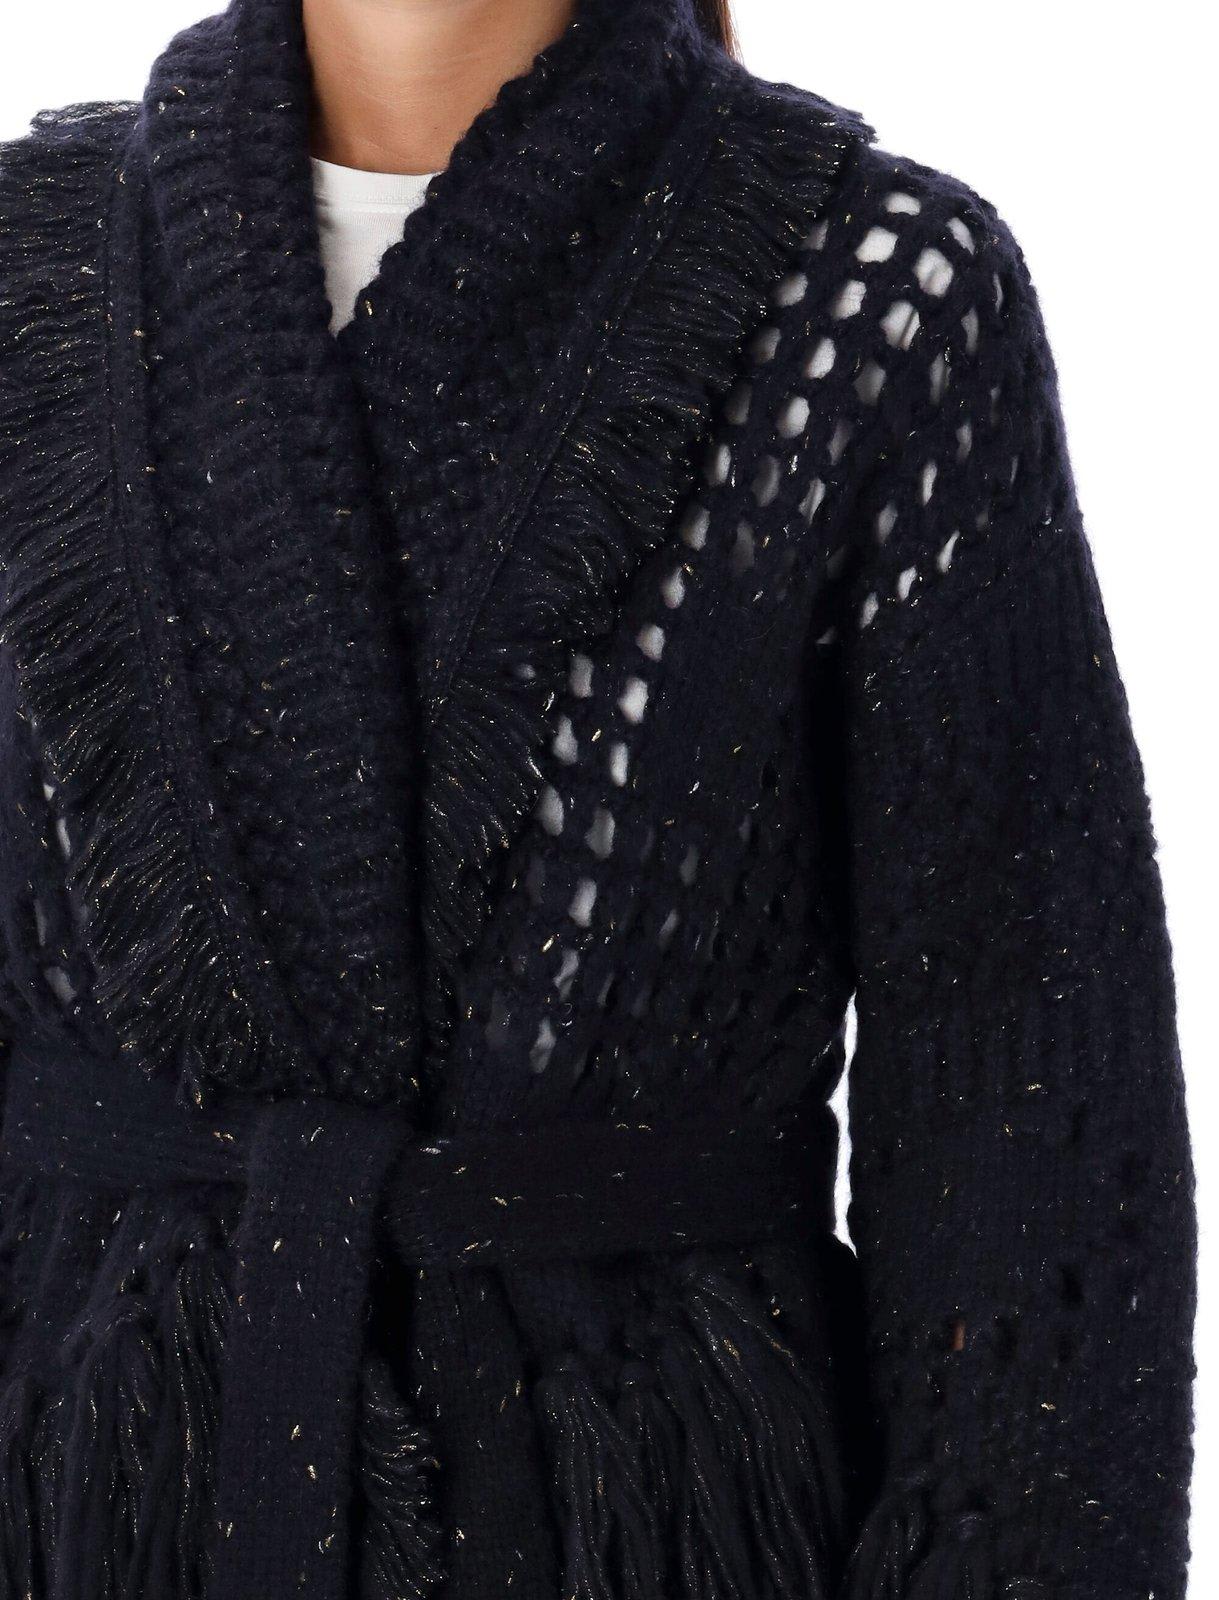 Shop Alanui The Astral Speckle Knitted Fringed Cardigan